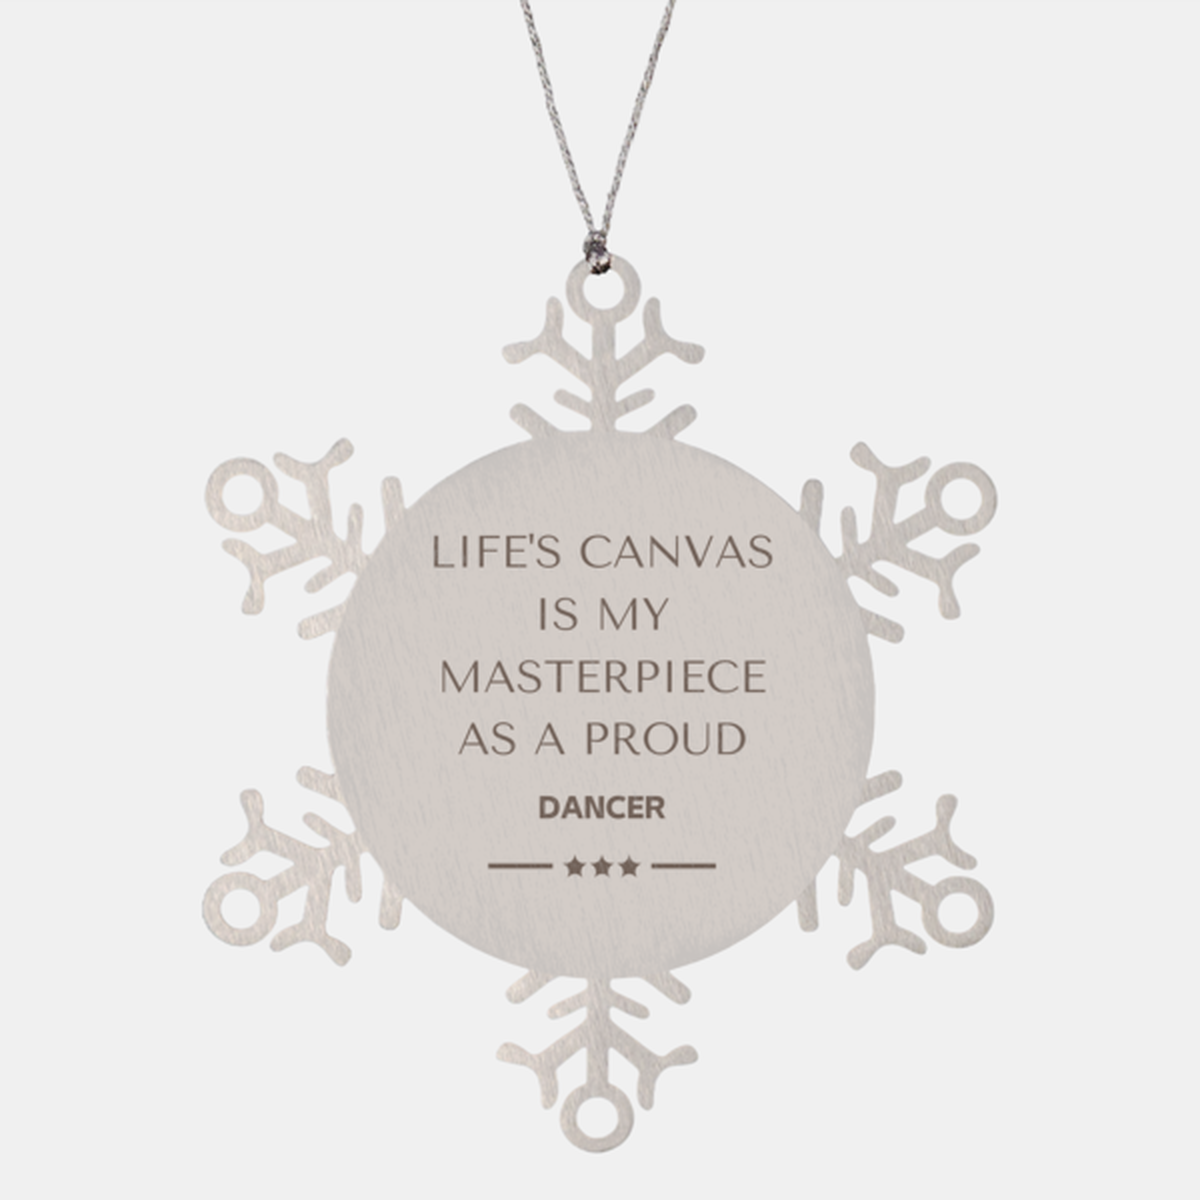 Proud Dancer Gifts, Life's canvas is my masterpiece, Epic Birthday Christmas Unique Snowflake Ornament For Dancer, Coworkers, Men, Women, Friends